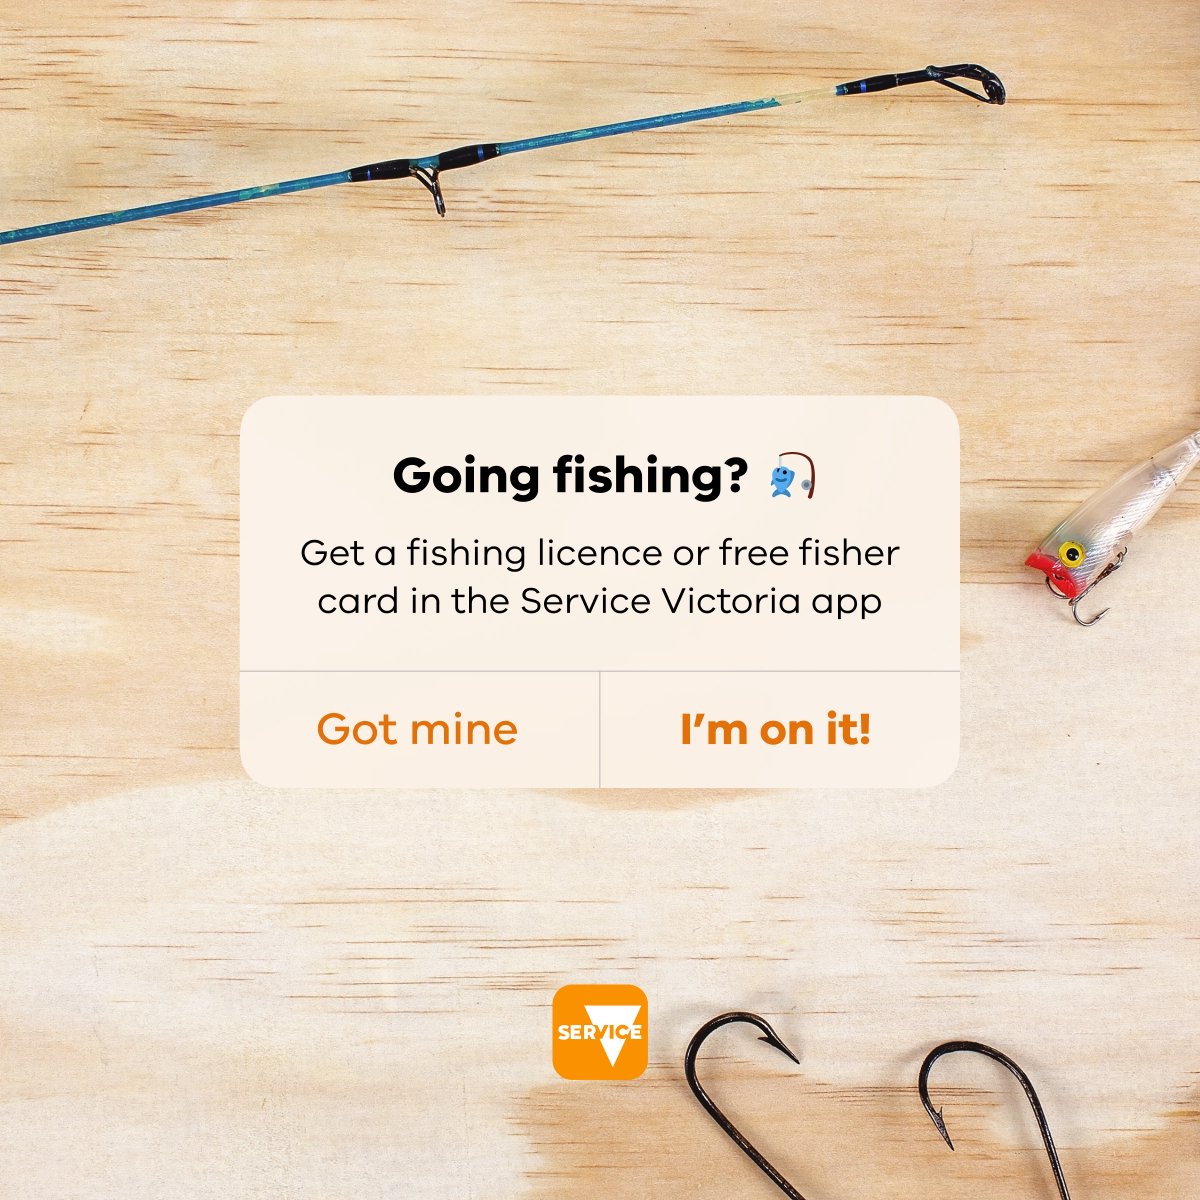 🎣 Going fishing? The cheapest and quickest way to buy your fishing licence is directly from Service Victoria. No standing in queues or waiting on hold. Get yours now in the Service Victoria app or at service.vic.gov.au/fishing 
@VicFisheries 
#ServiceVictoria #FishingLicence